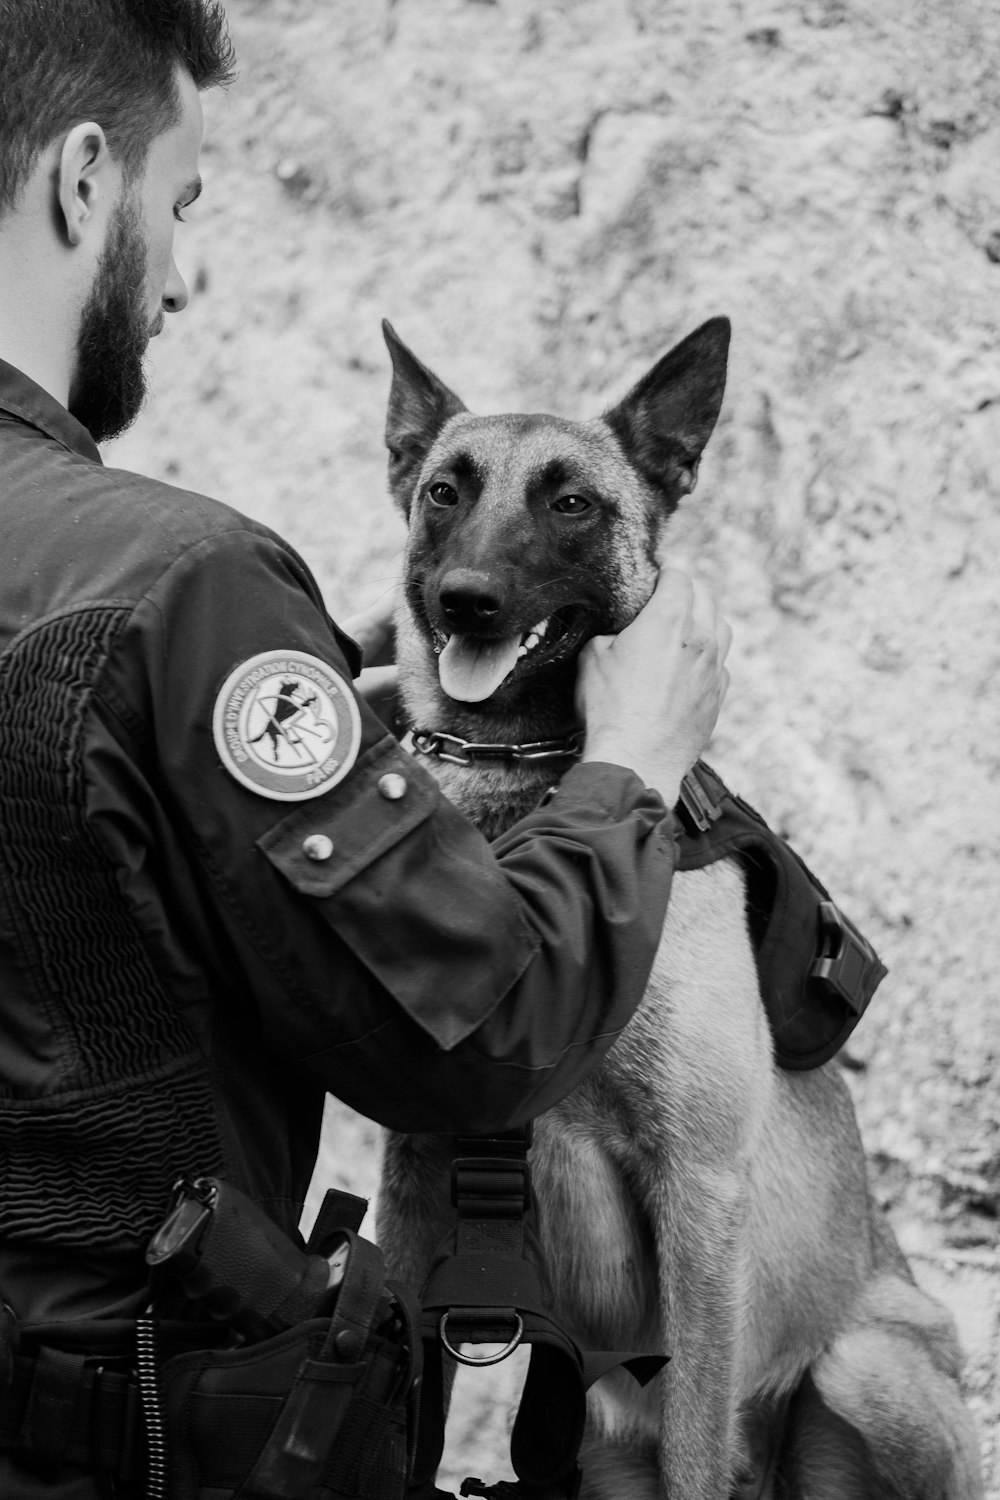 grayscale photo of man in police uniform carrying a dog